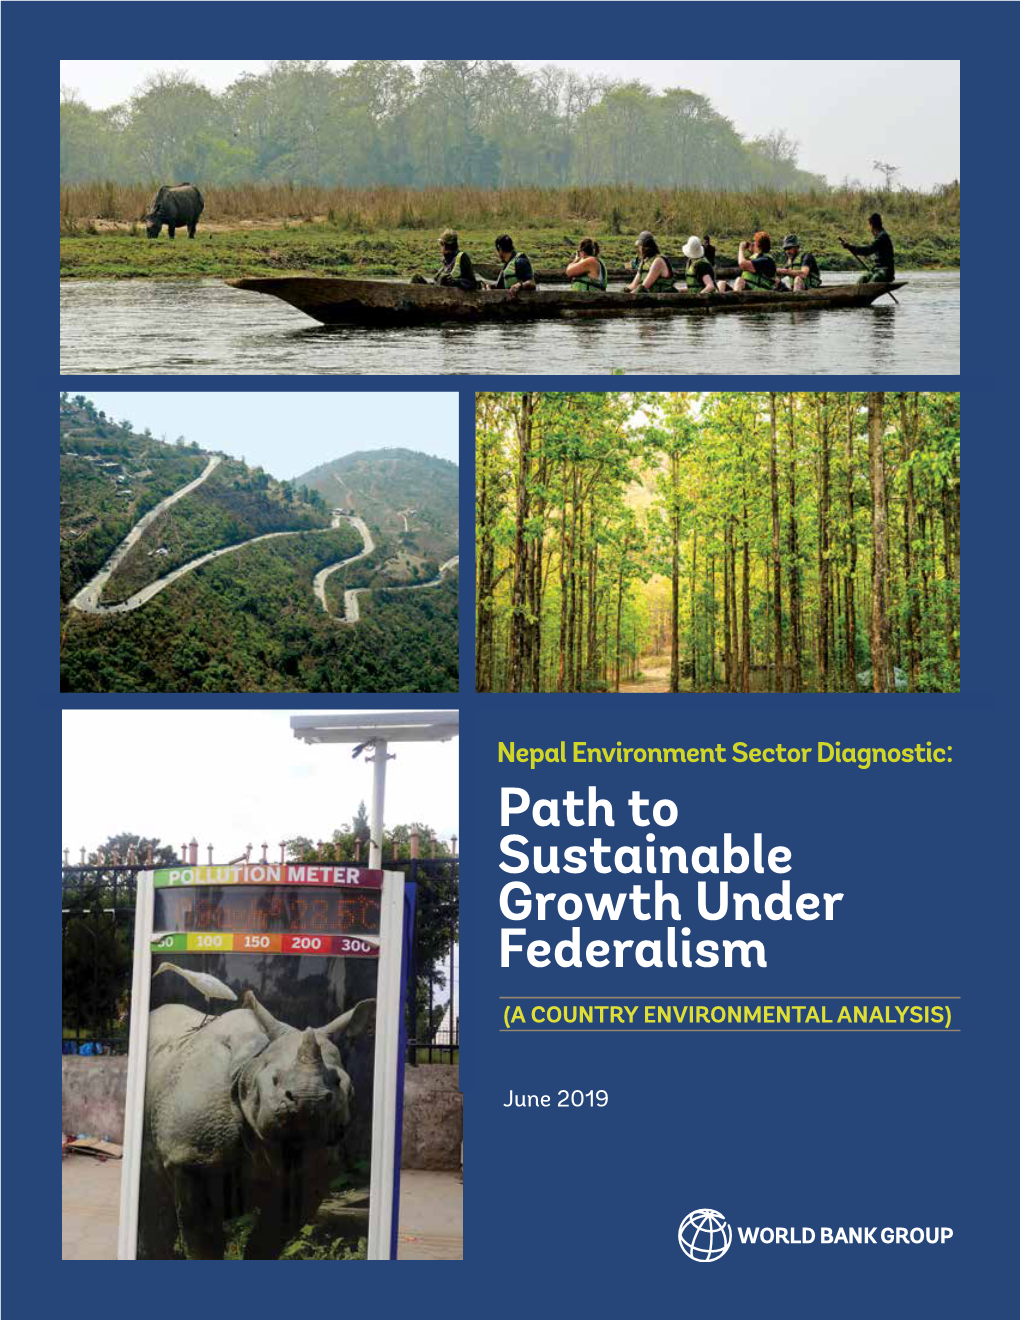 Path to Sustainable Growth Under Federalism (A COUNTRY ENVIRONMENTAL ANALYSIS)